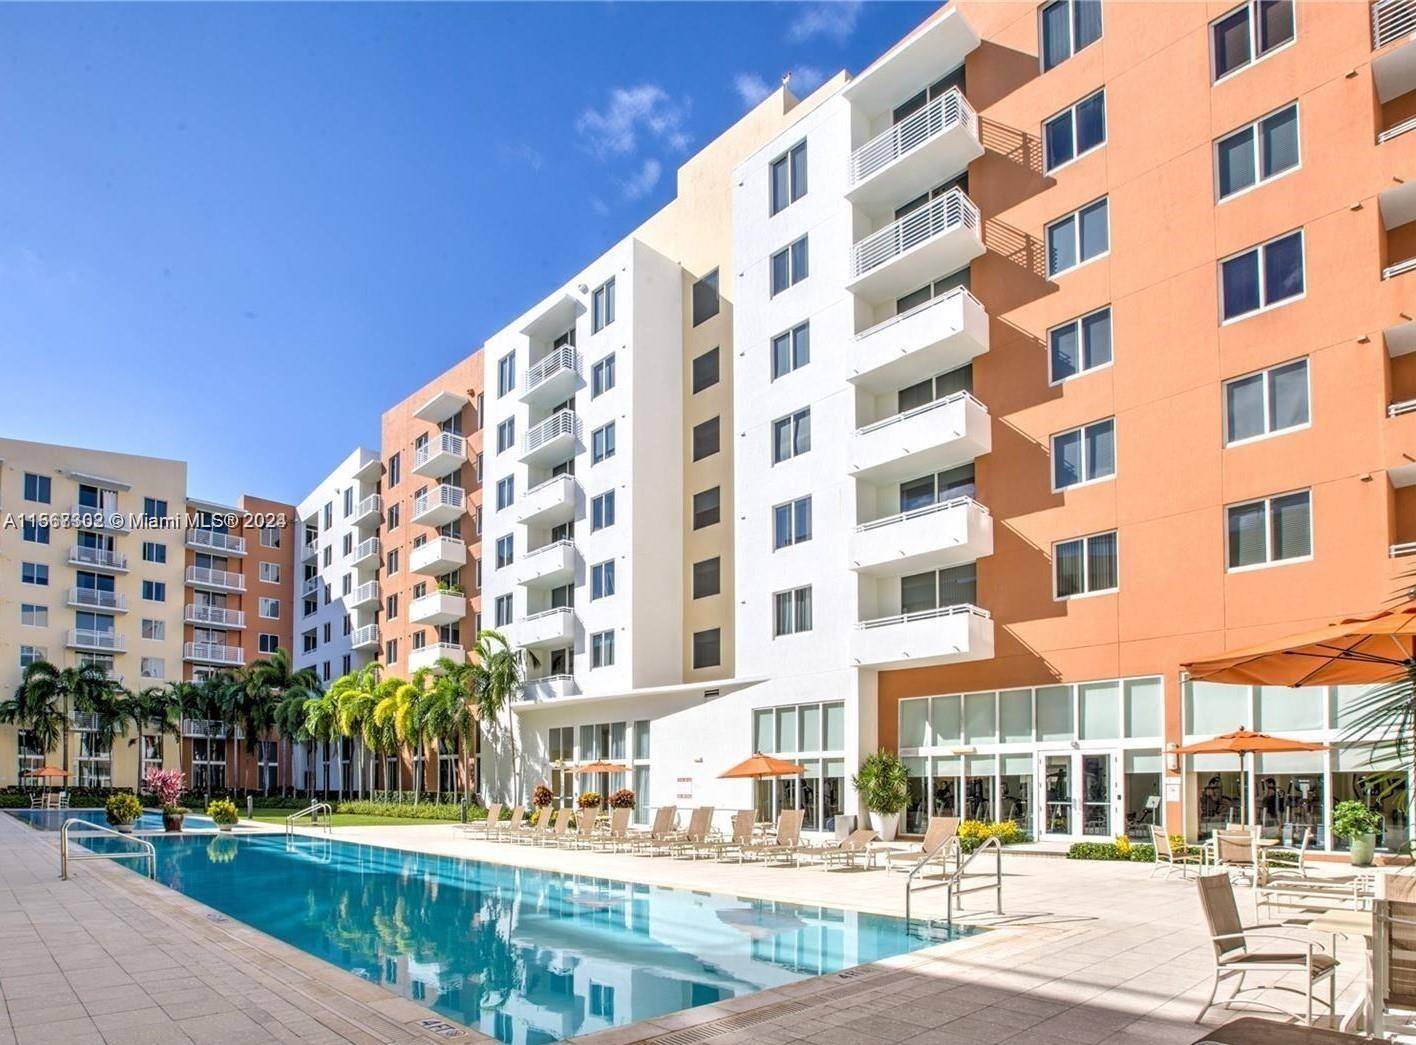 Located in the heart of Aventura, this property boasts a host of amenities.